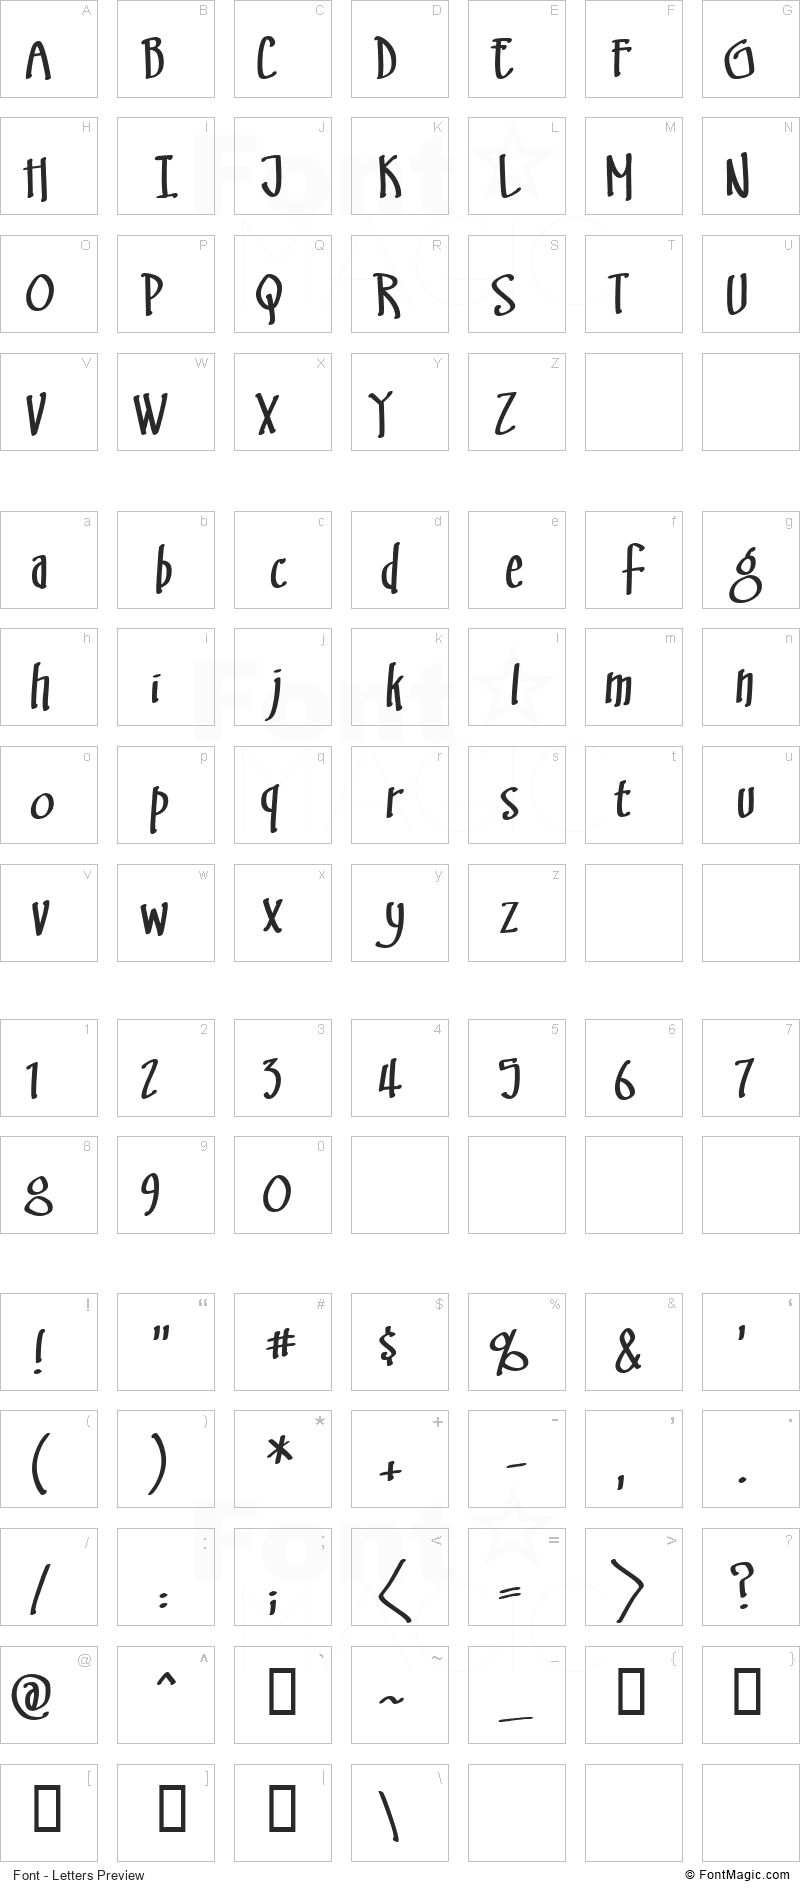 Swingset BB Font - All Latters Preview Chart